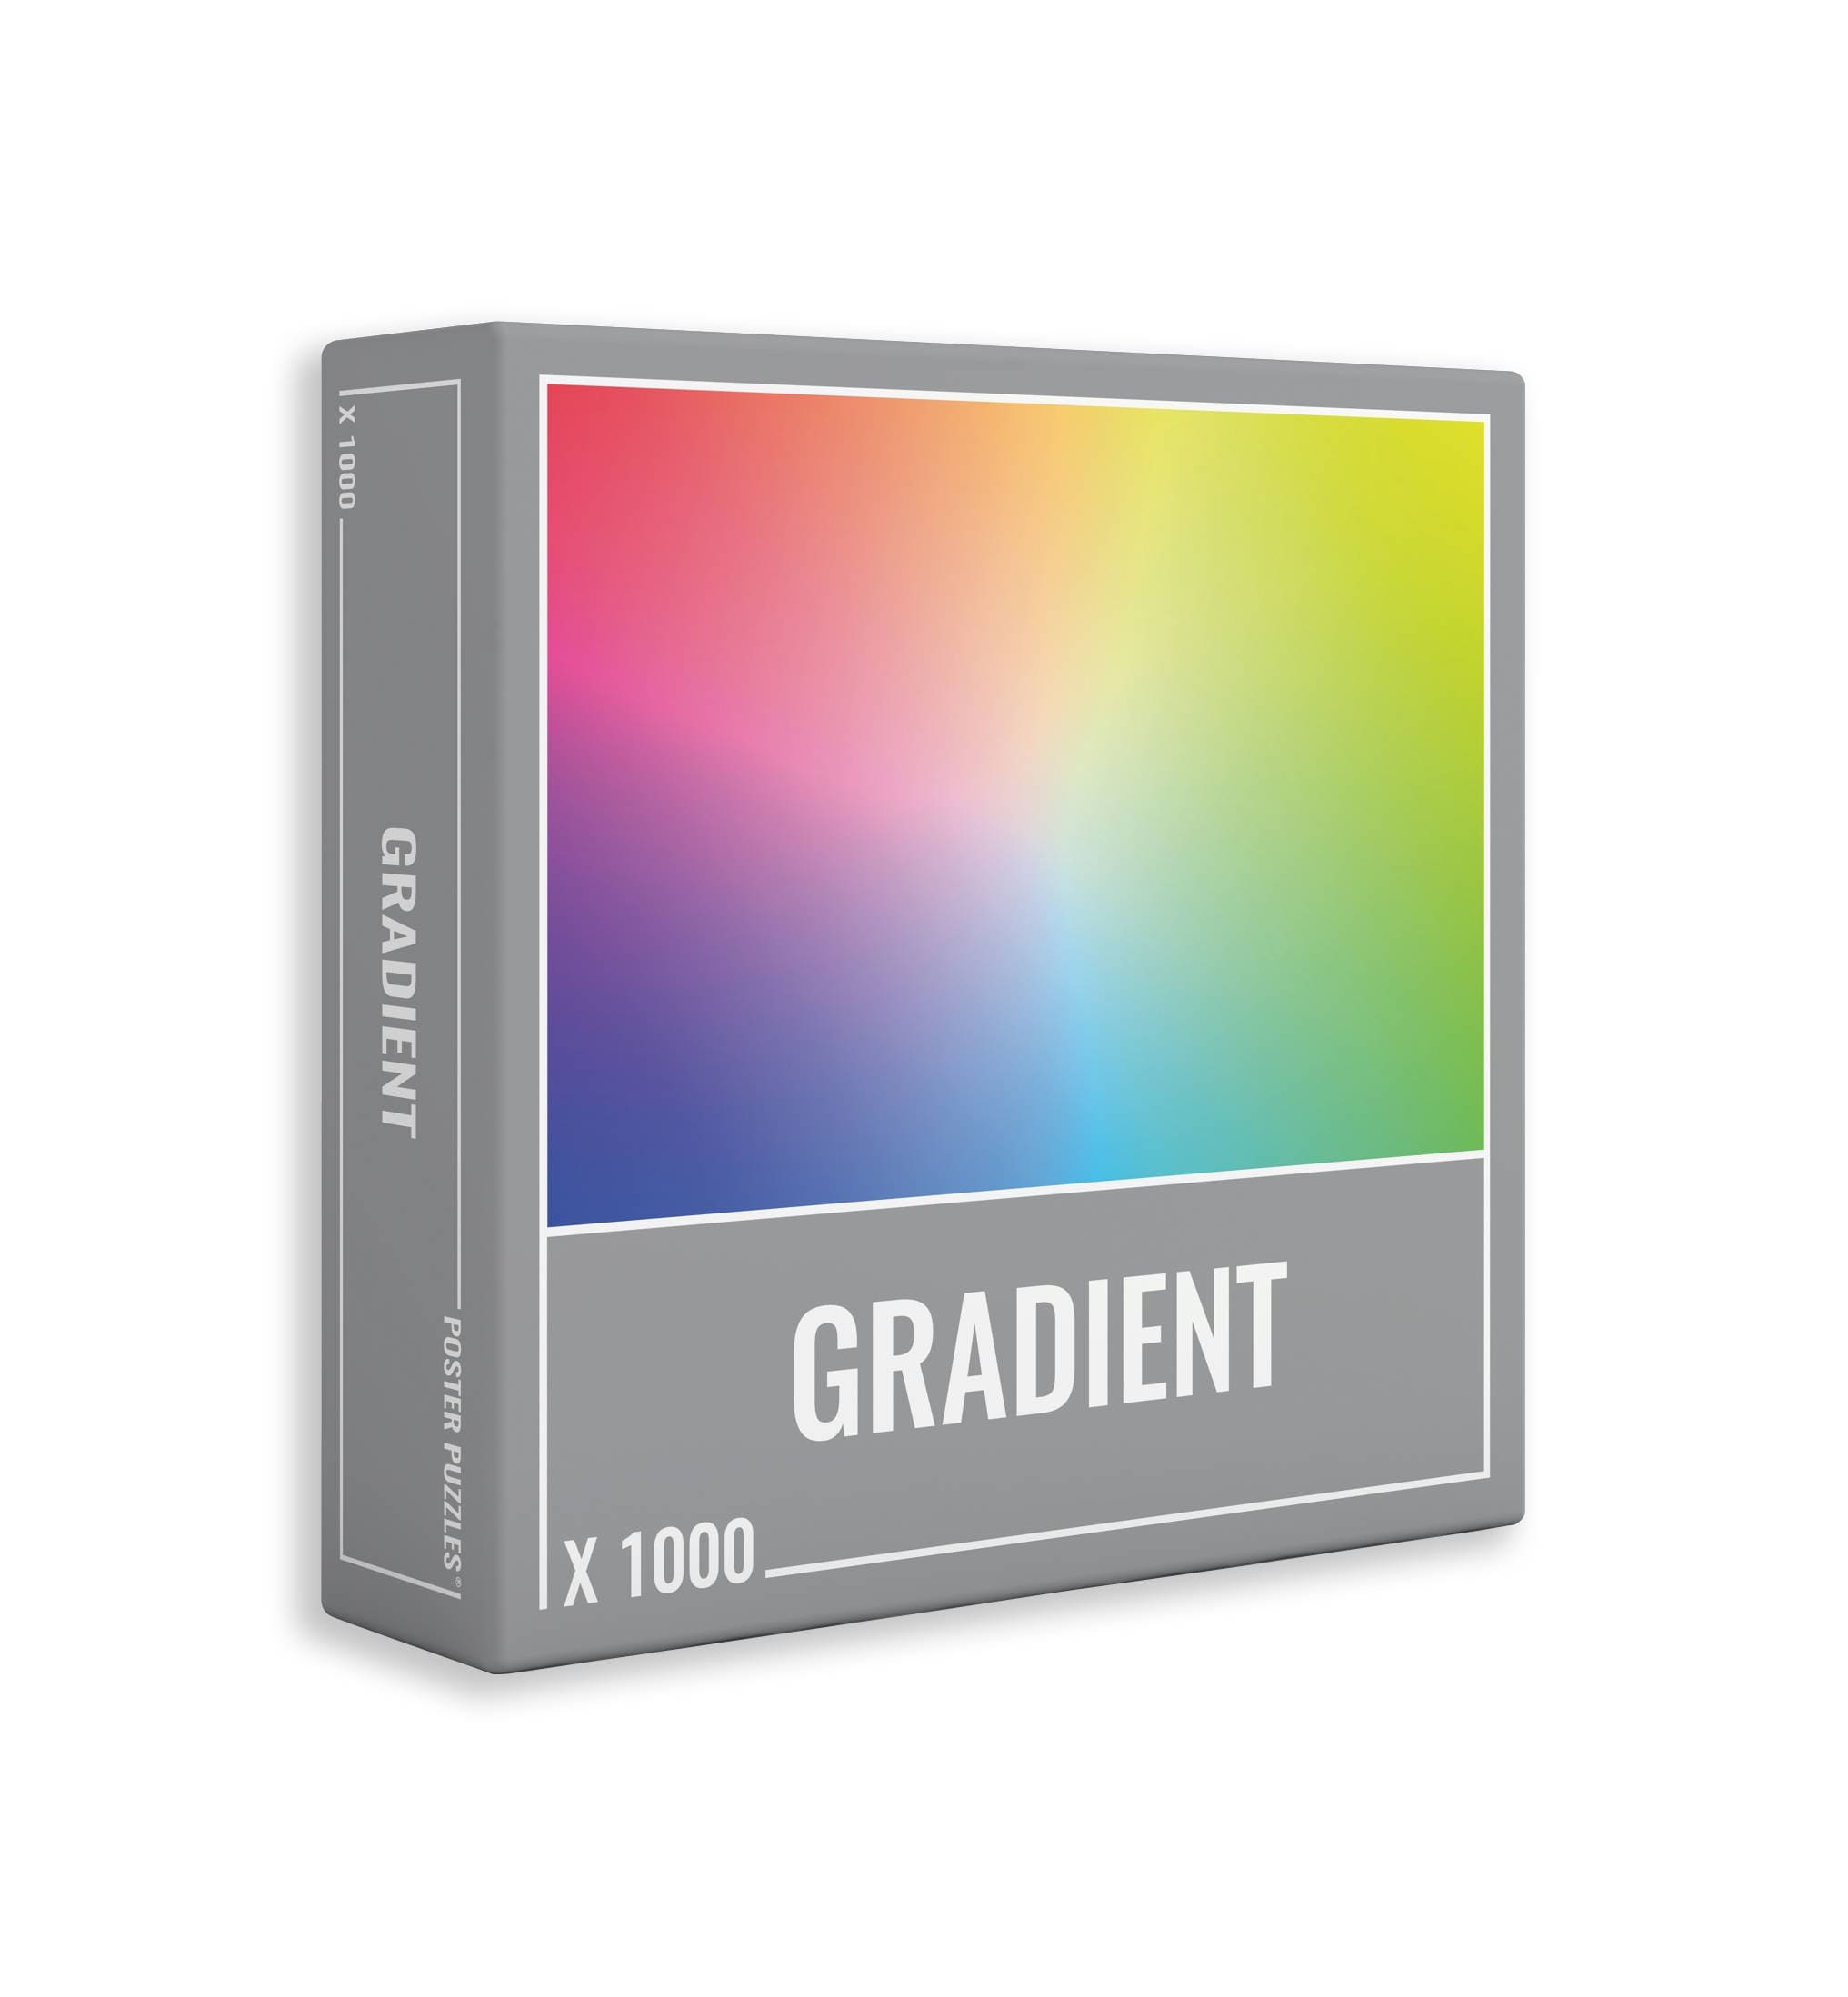 Doing the NEW 5000 Piece Gradient Jigsaw Puzzle 